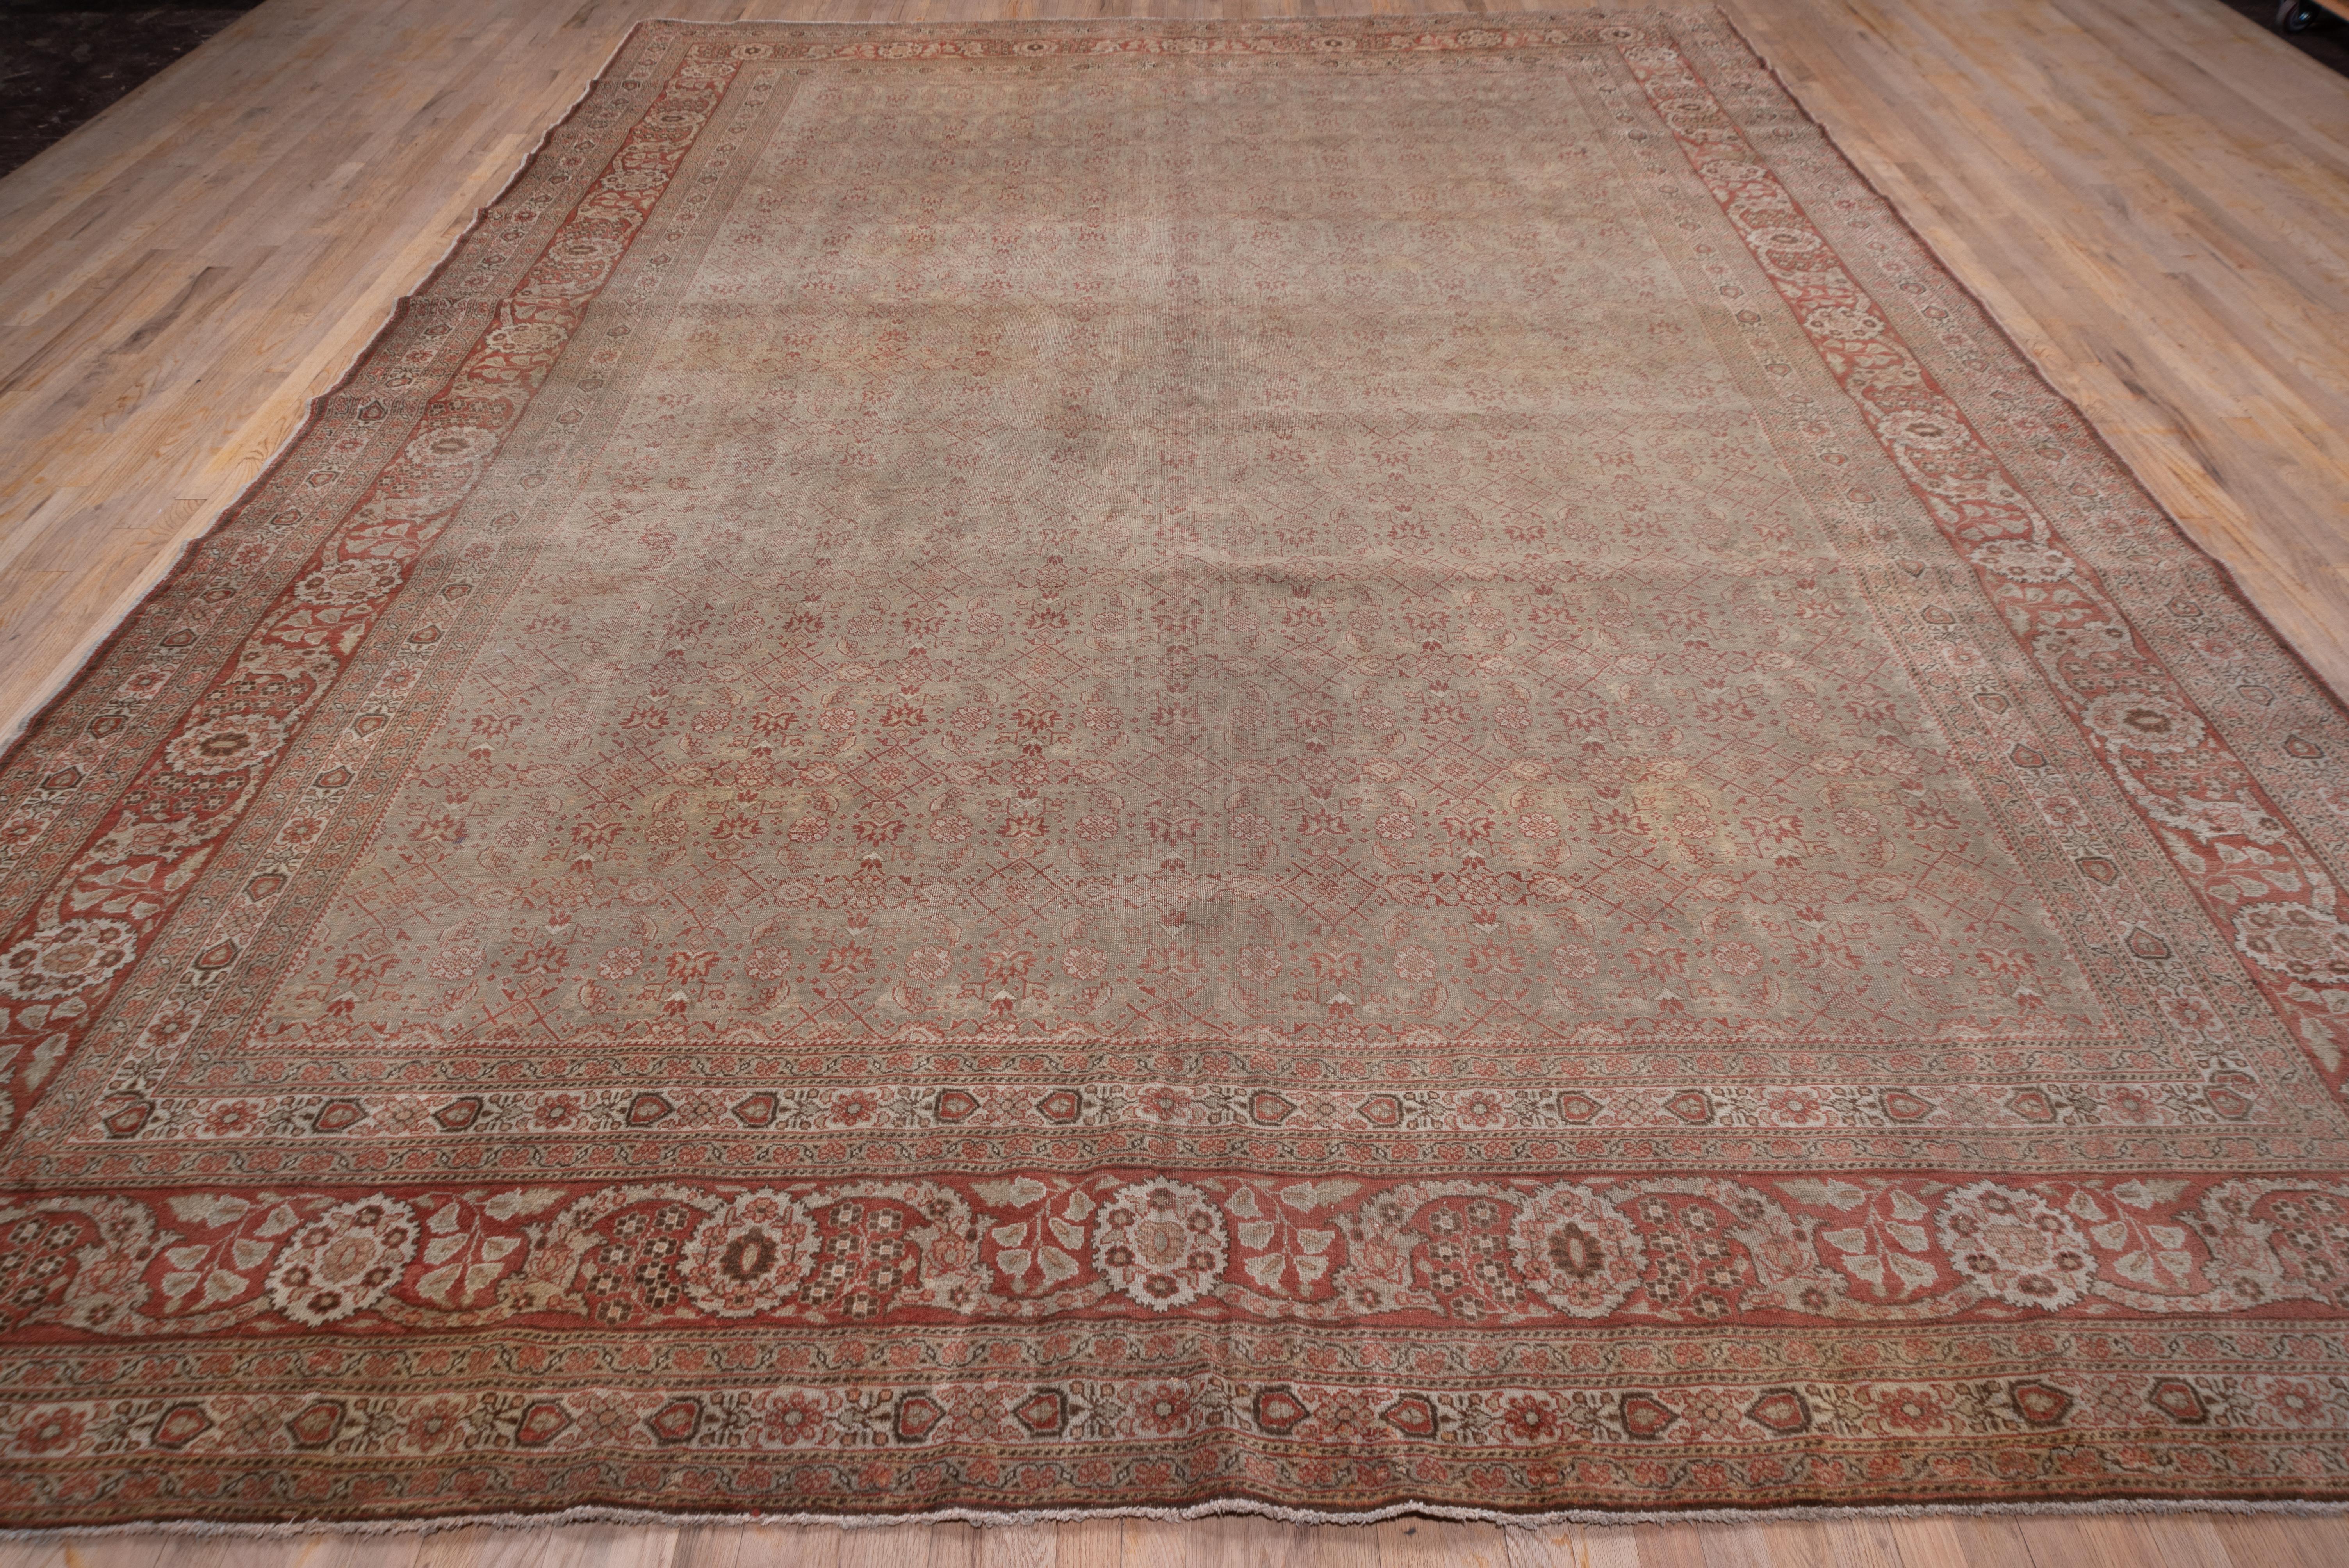 Antique Tabriz Carpet, circa 1900s In Excellent Condition For Sale In New York, NY